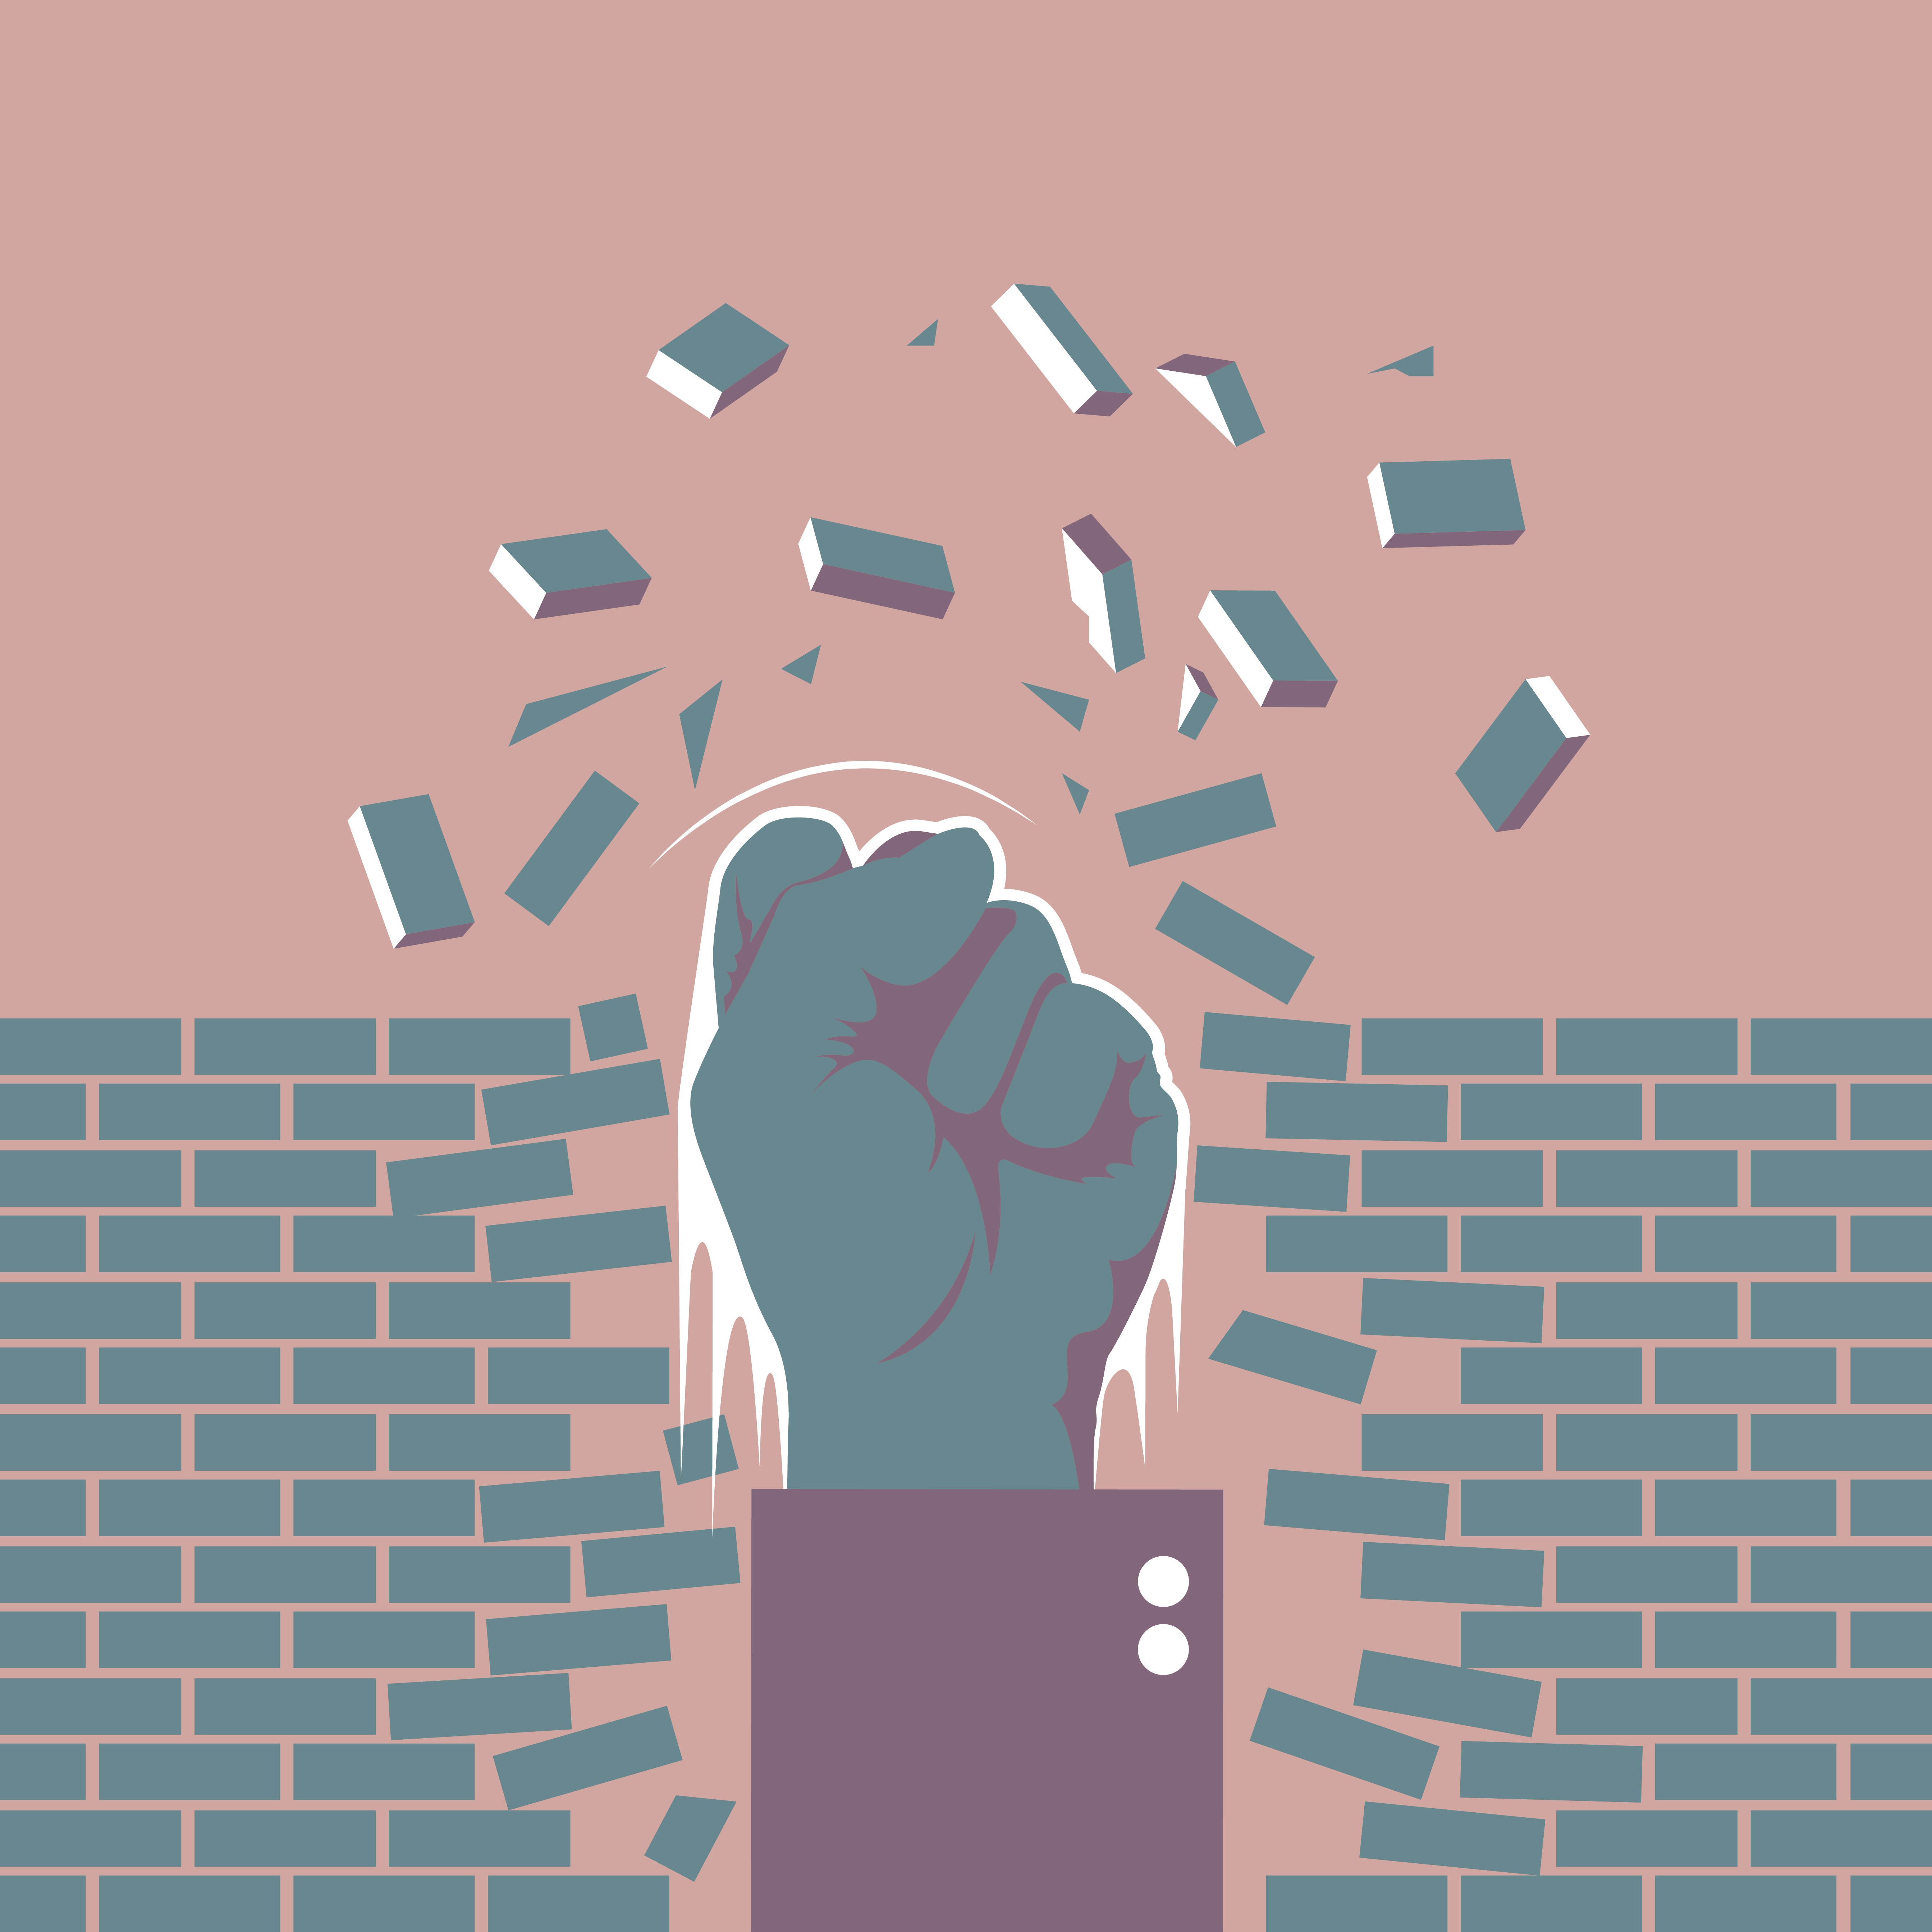 An illustration of a fist punches up through a brick wall. Bricks fly through the air.